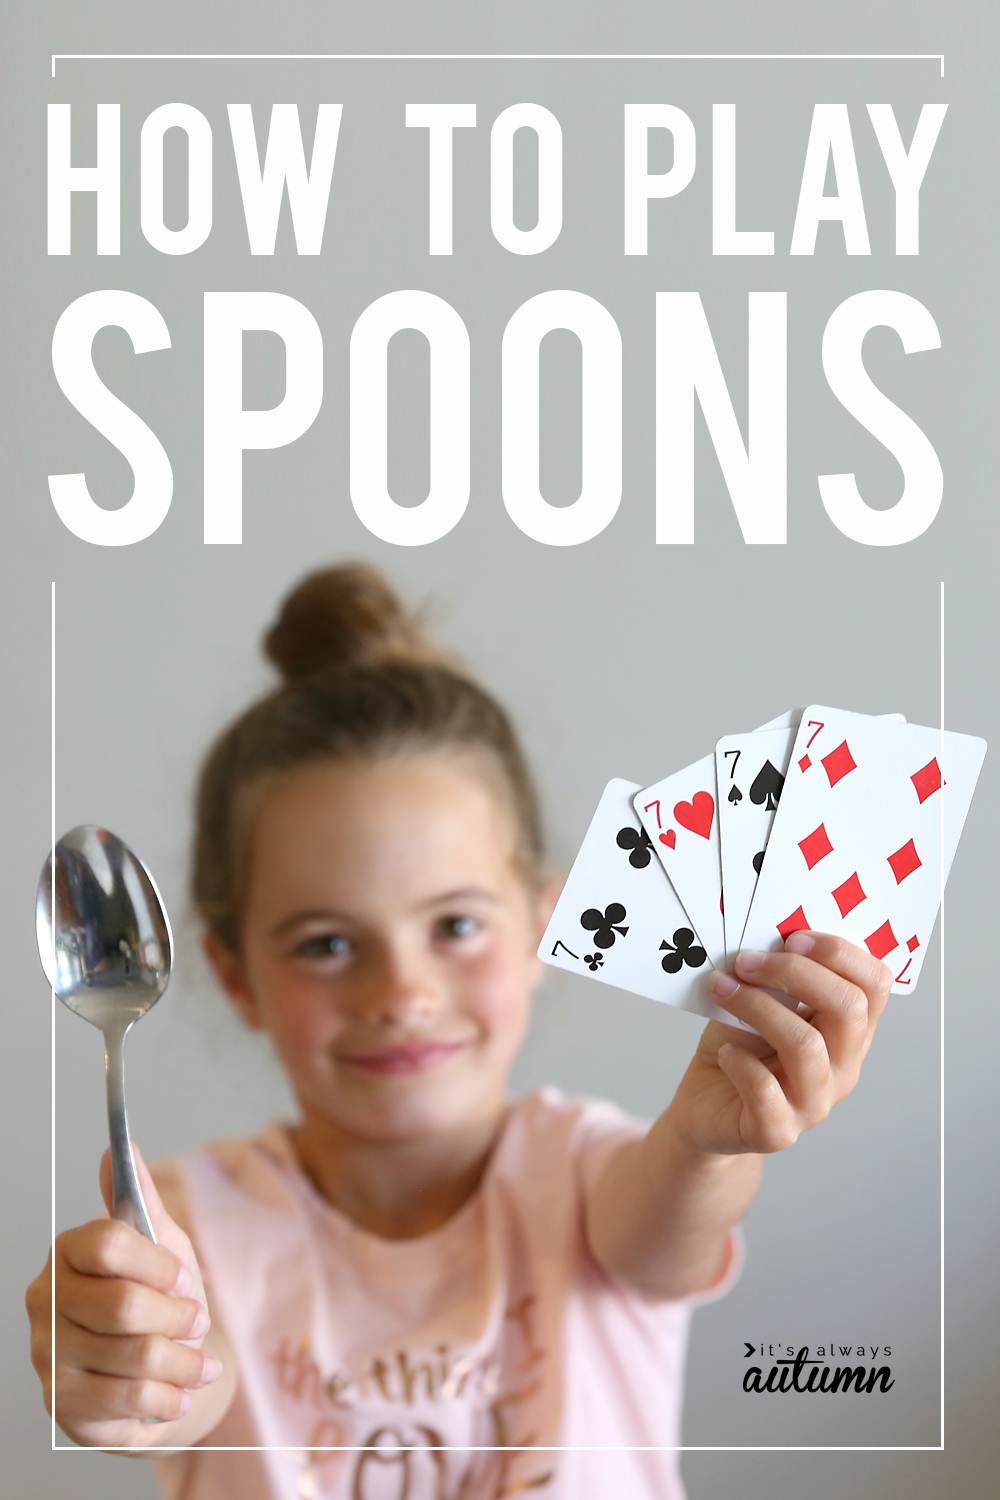 girl holding spoons and card with text: how to play spoons